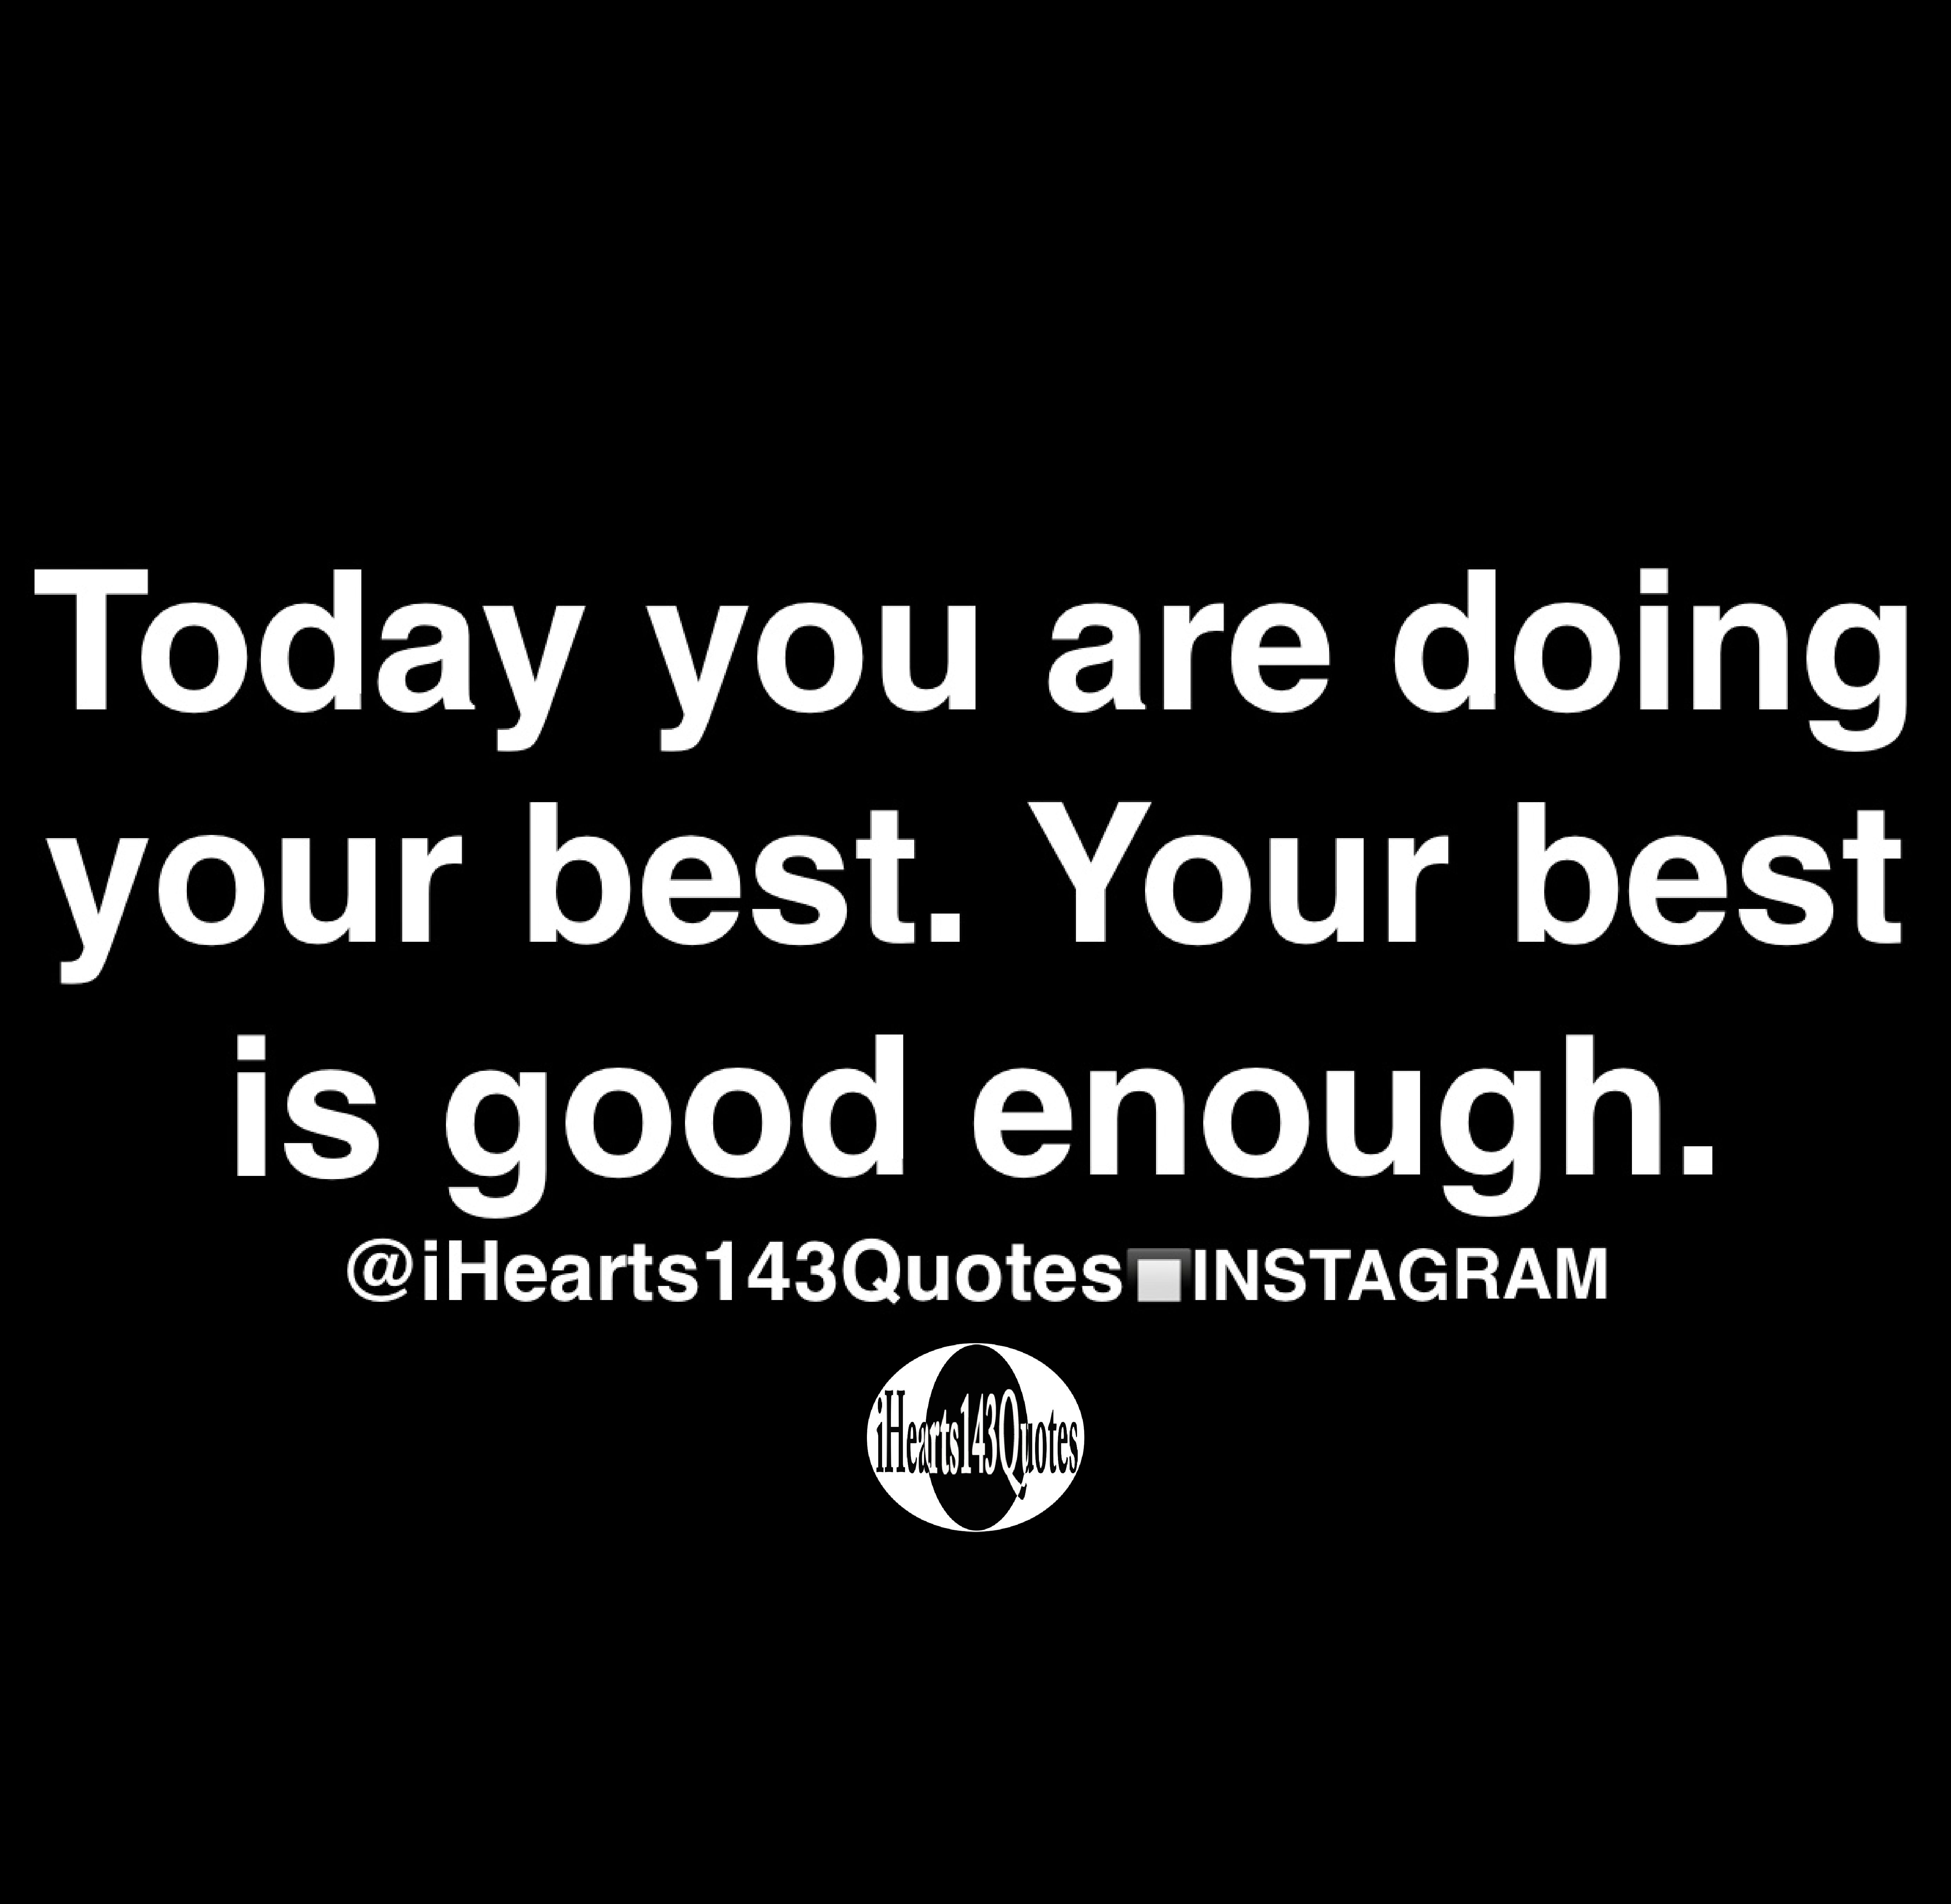 Today You Are Doing Your Best Your Best Is Good Enough Quotes Ihearts143quotes